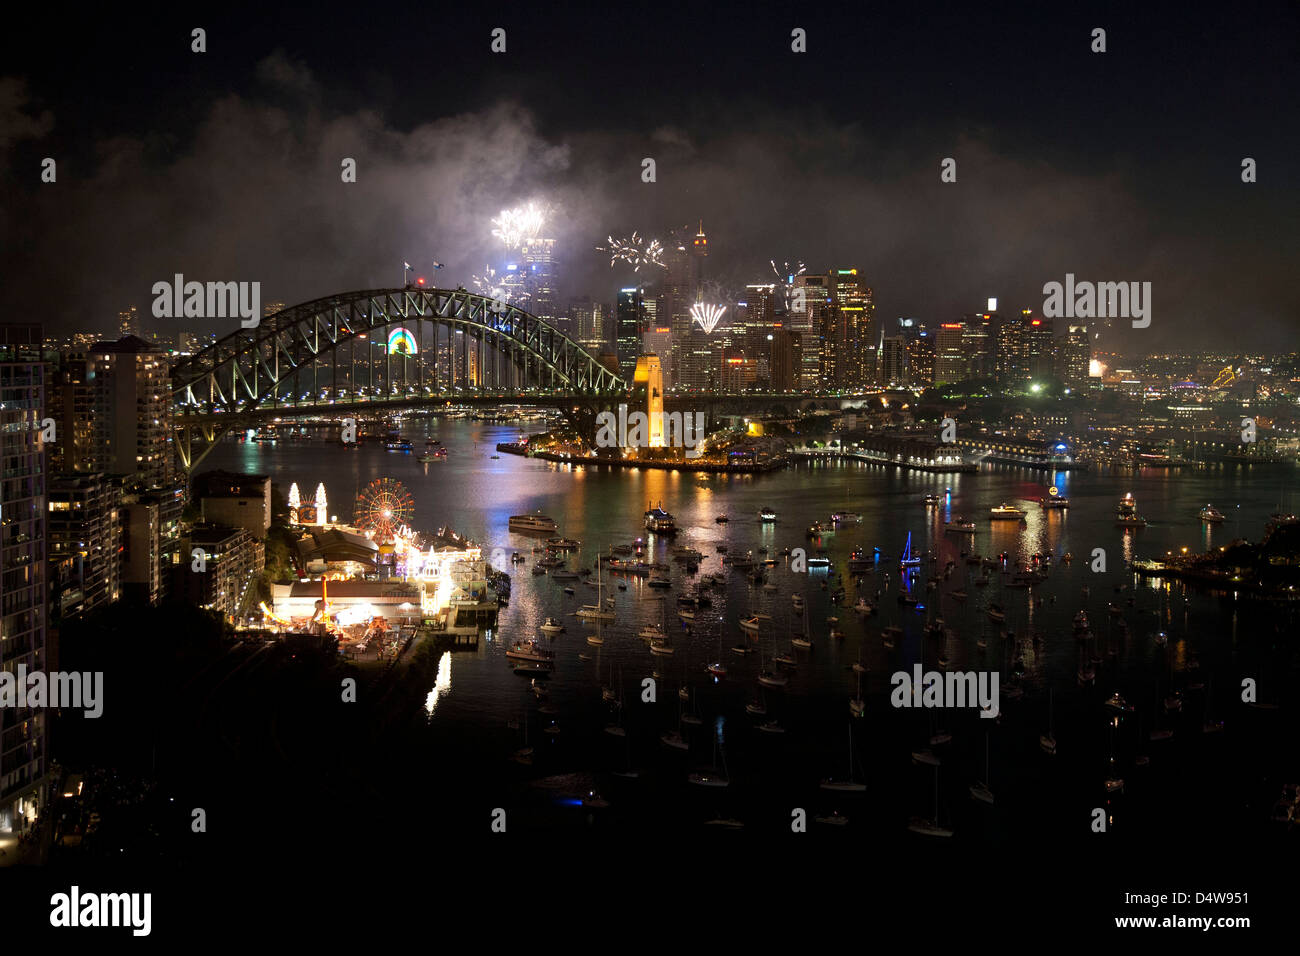 New Year's Eve fireworks celebrations as seen from the North Shore of Sydney's harbour bridge Stock Photo